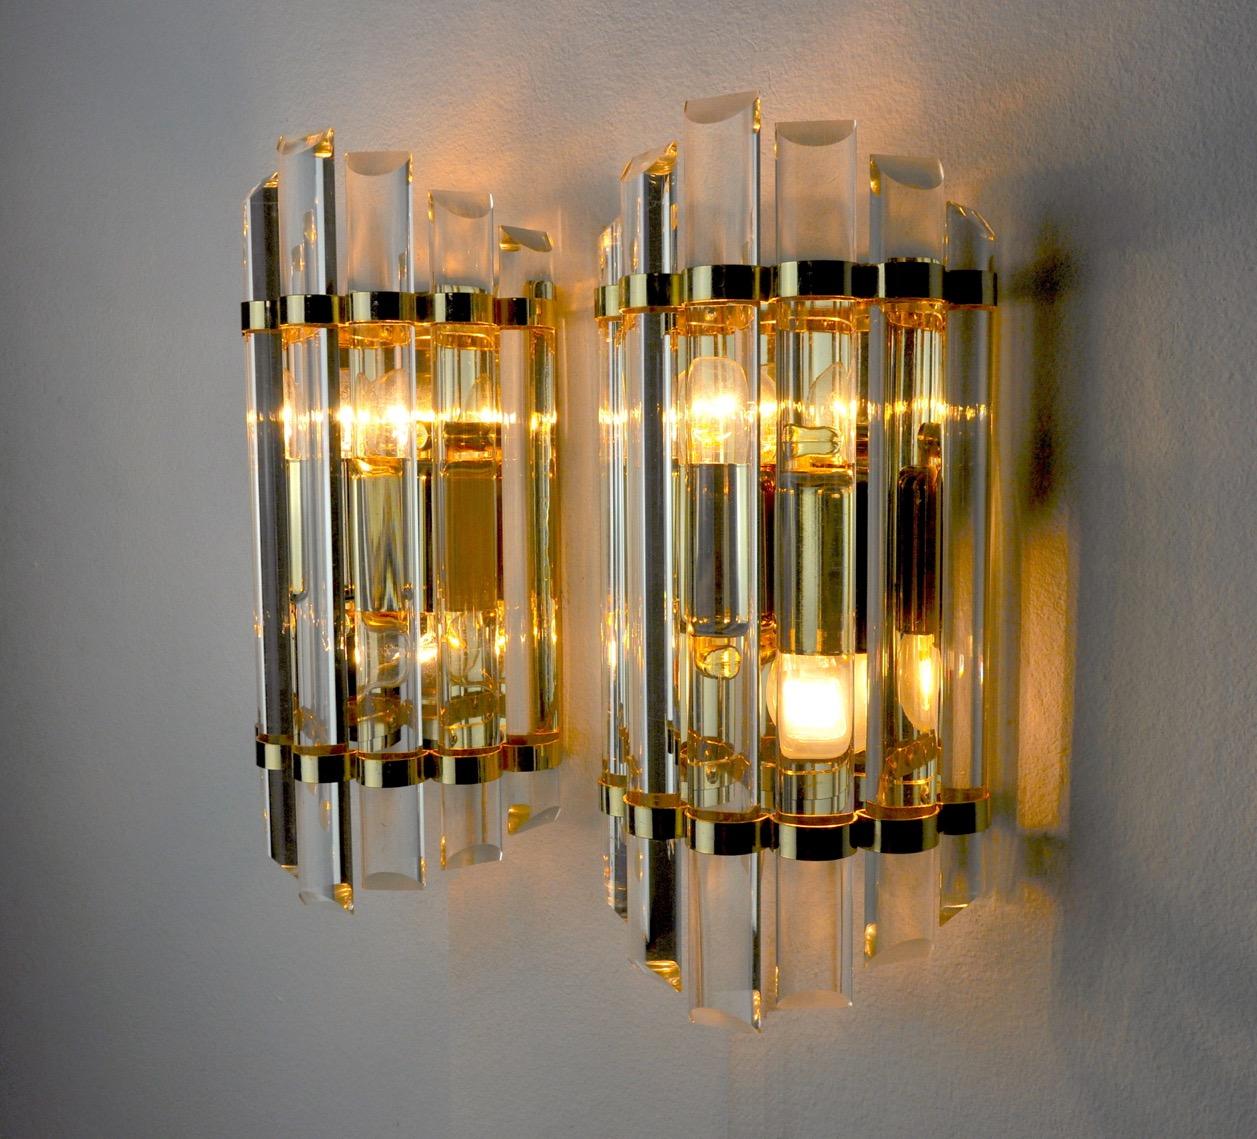 Pair of Venini Wall Lamps, Murano Glass, Italy, 1970 For Sale 1